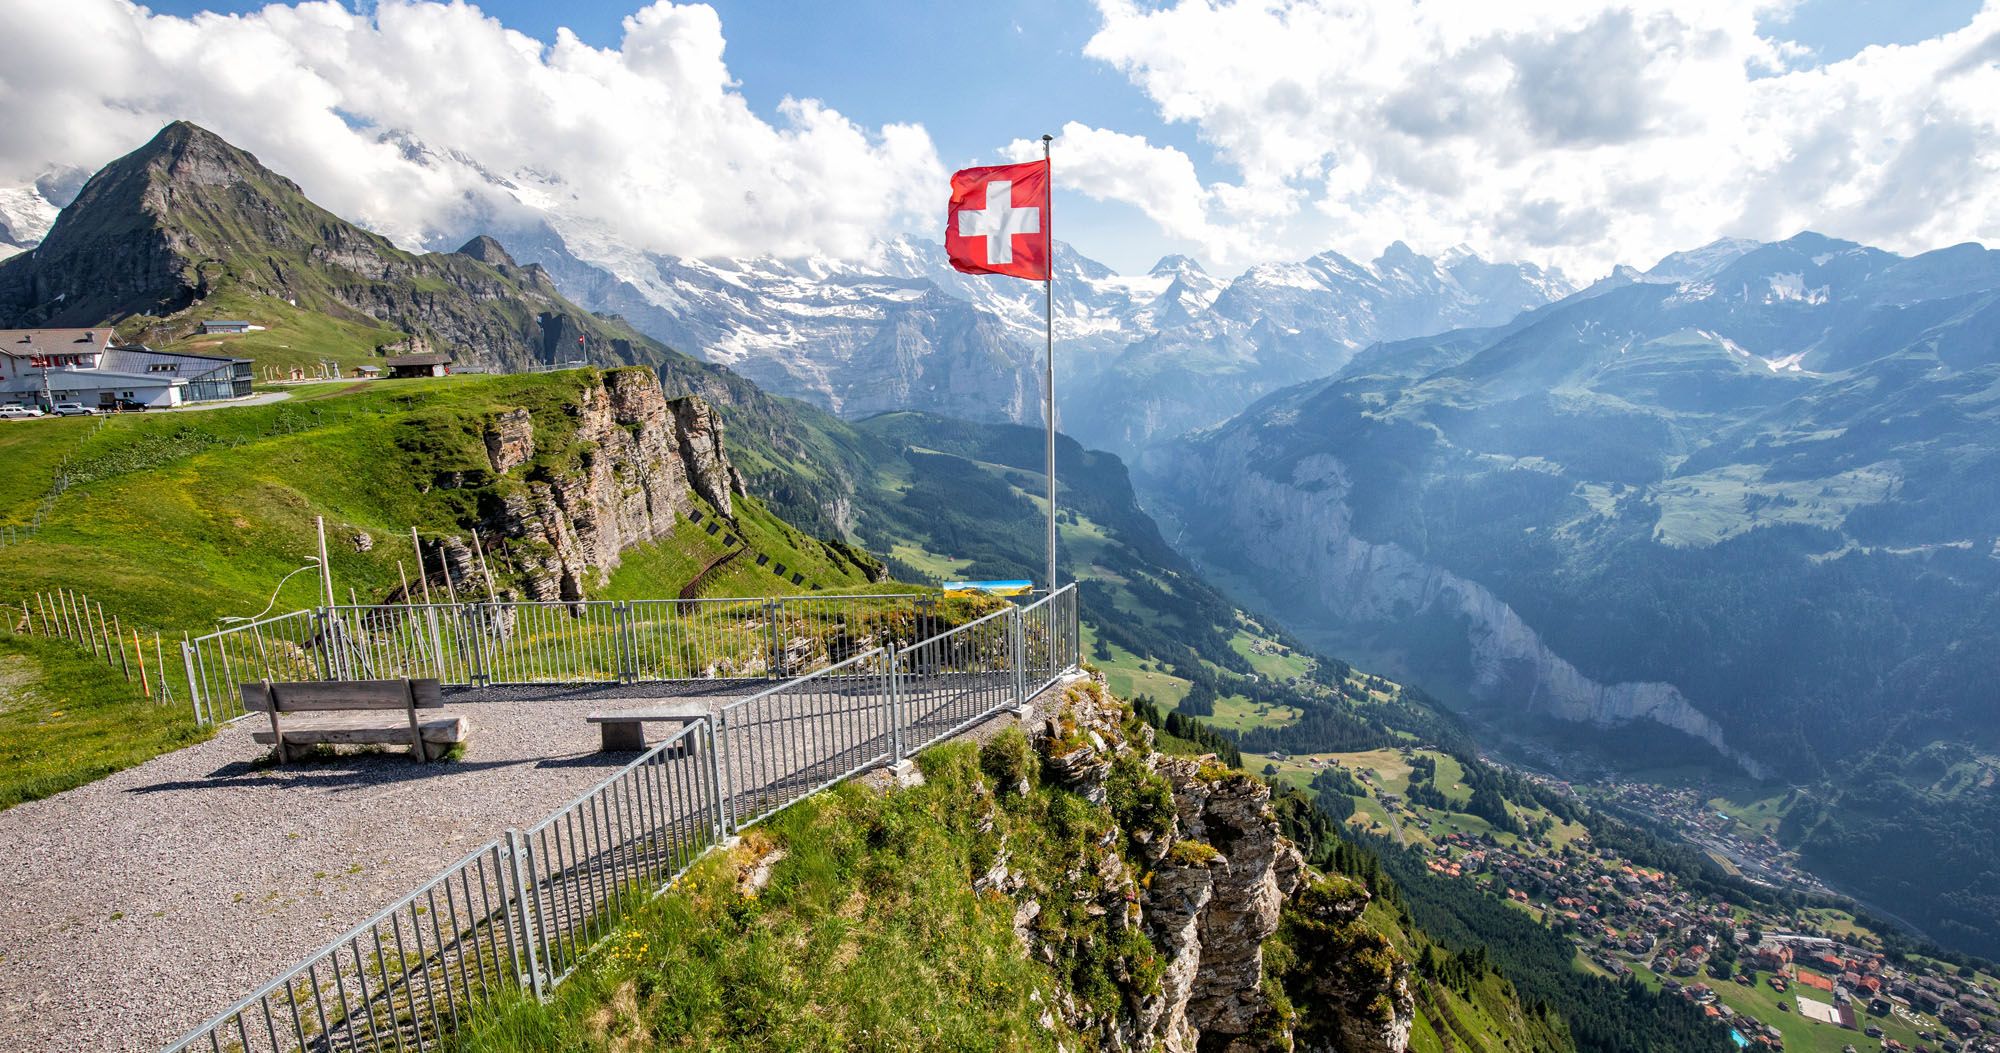 Featured image for “20 Amazing Things to Do in the Jungfrau Region of the Bernese Oberland”